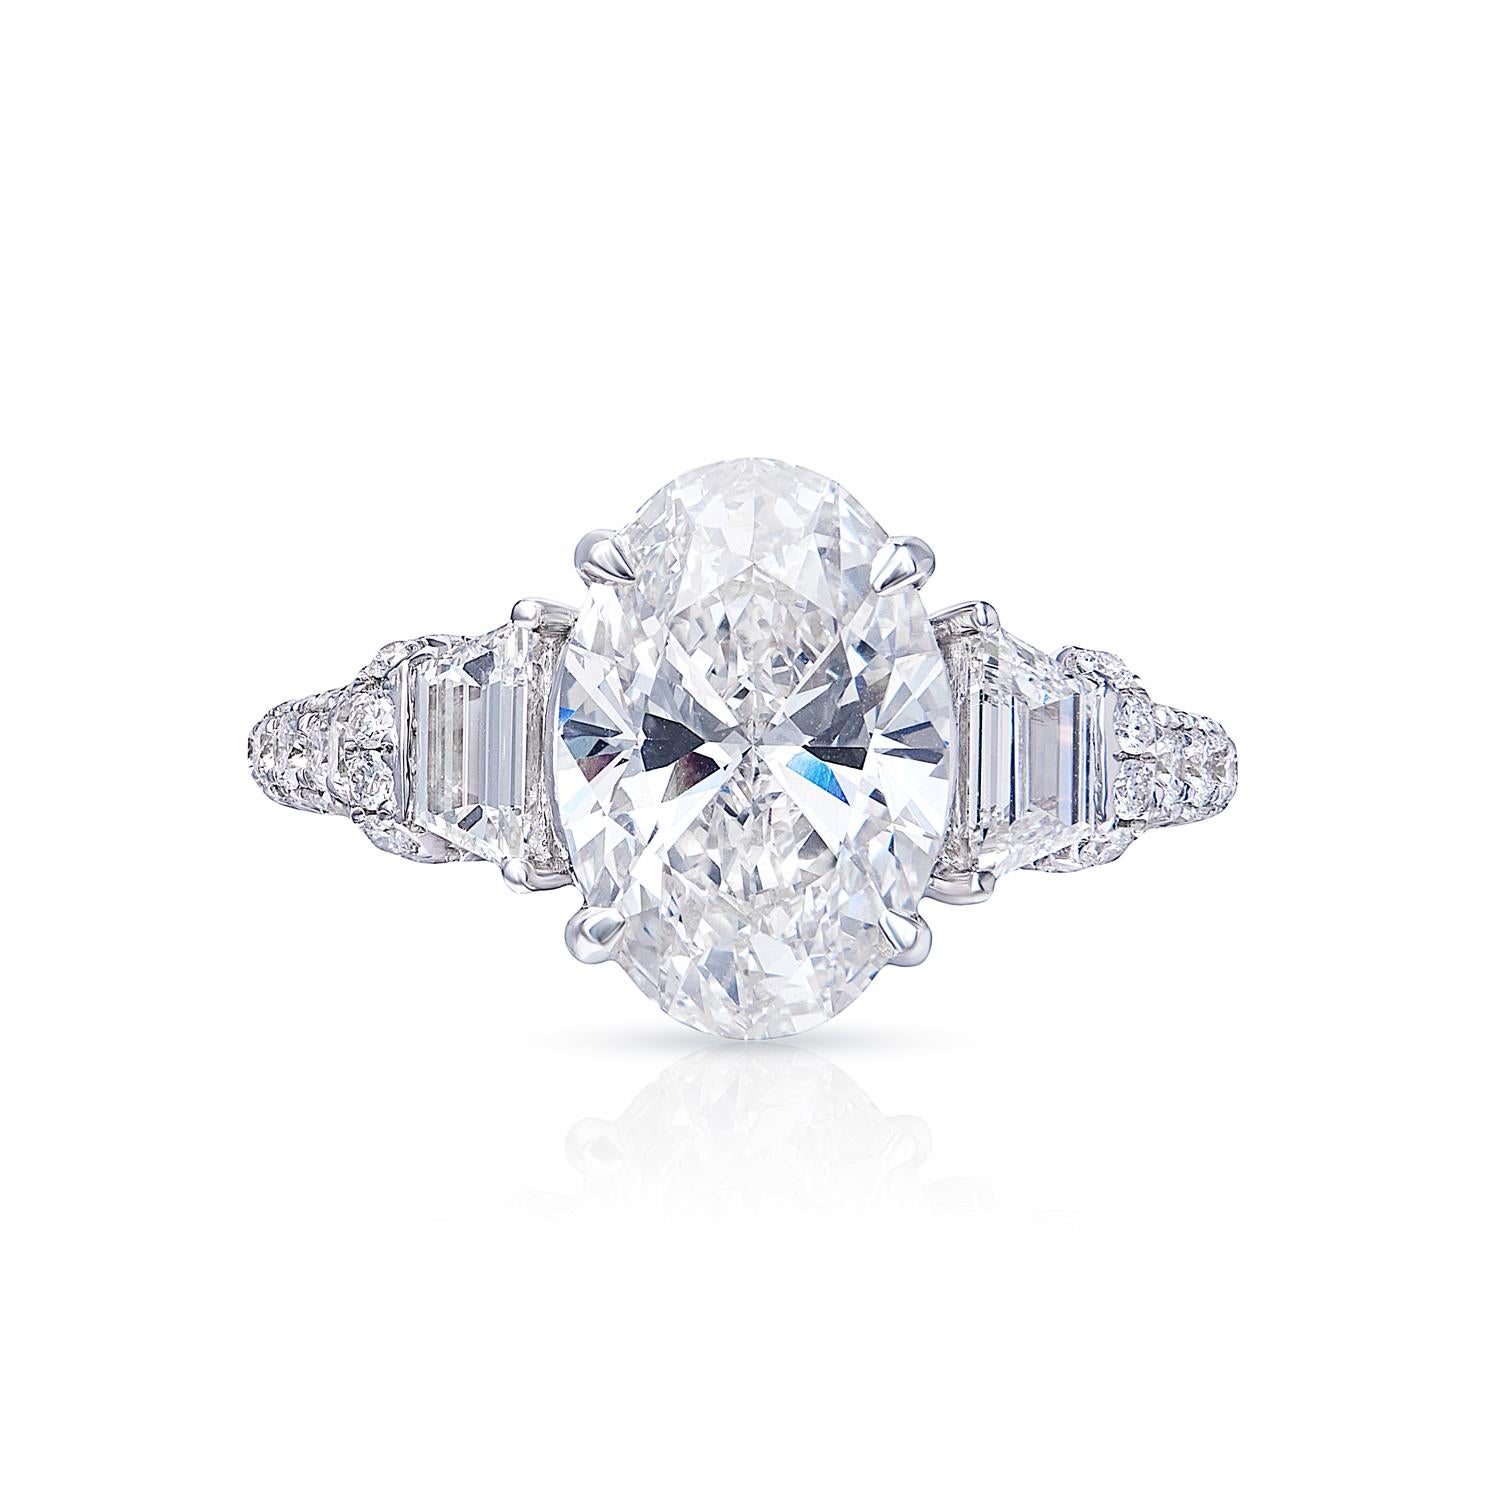 This gorgeous 3.46-carat oval cut diamond stone ring is made from the finest quality materials, with G color and VVS1 clarity for incredible brightness and sparkle. The ring is also top-of-the-line, crafted from 18-karat white gold and featuring a